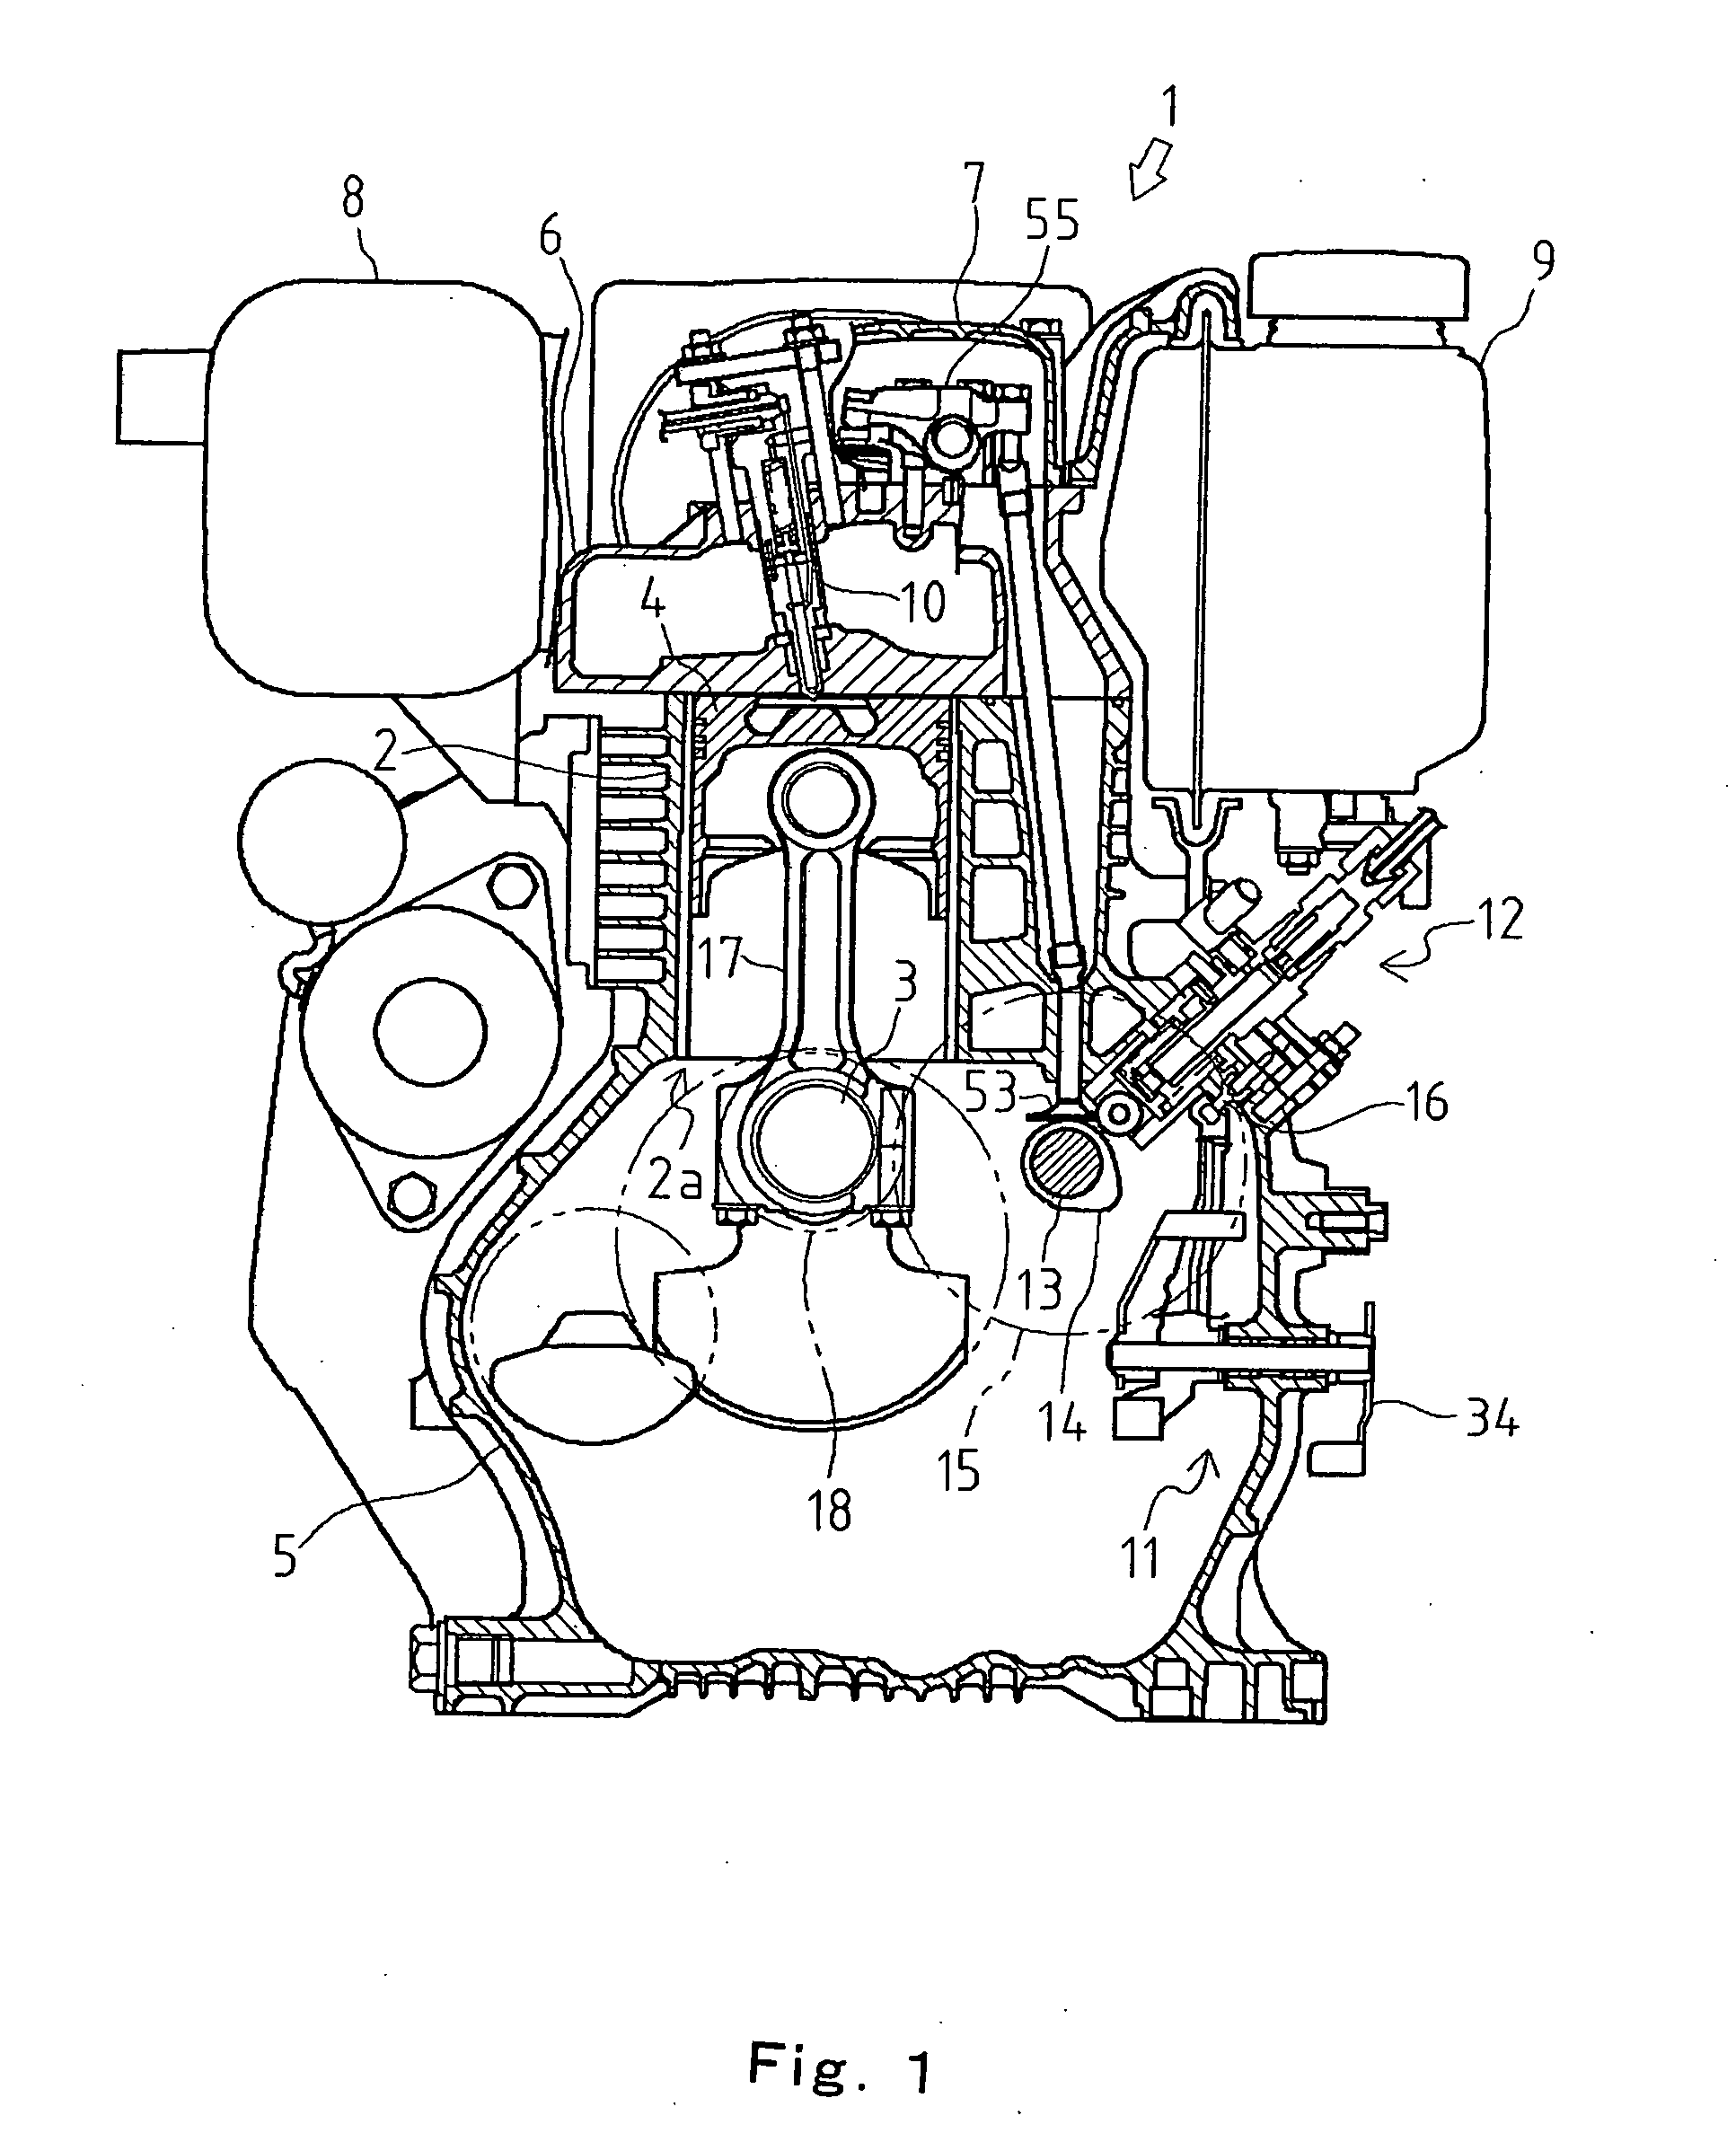 Exhaust gas recirculation device for engine